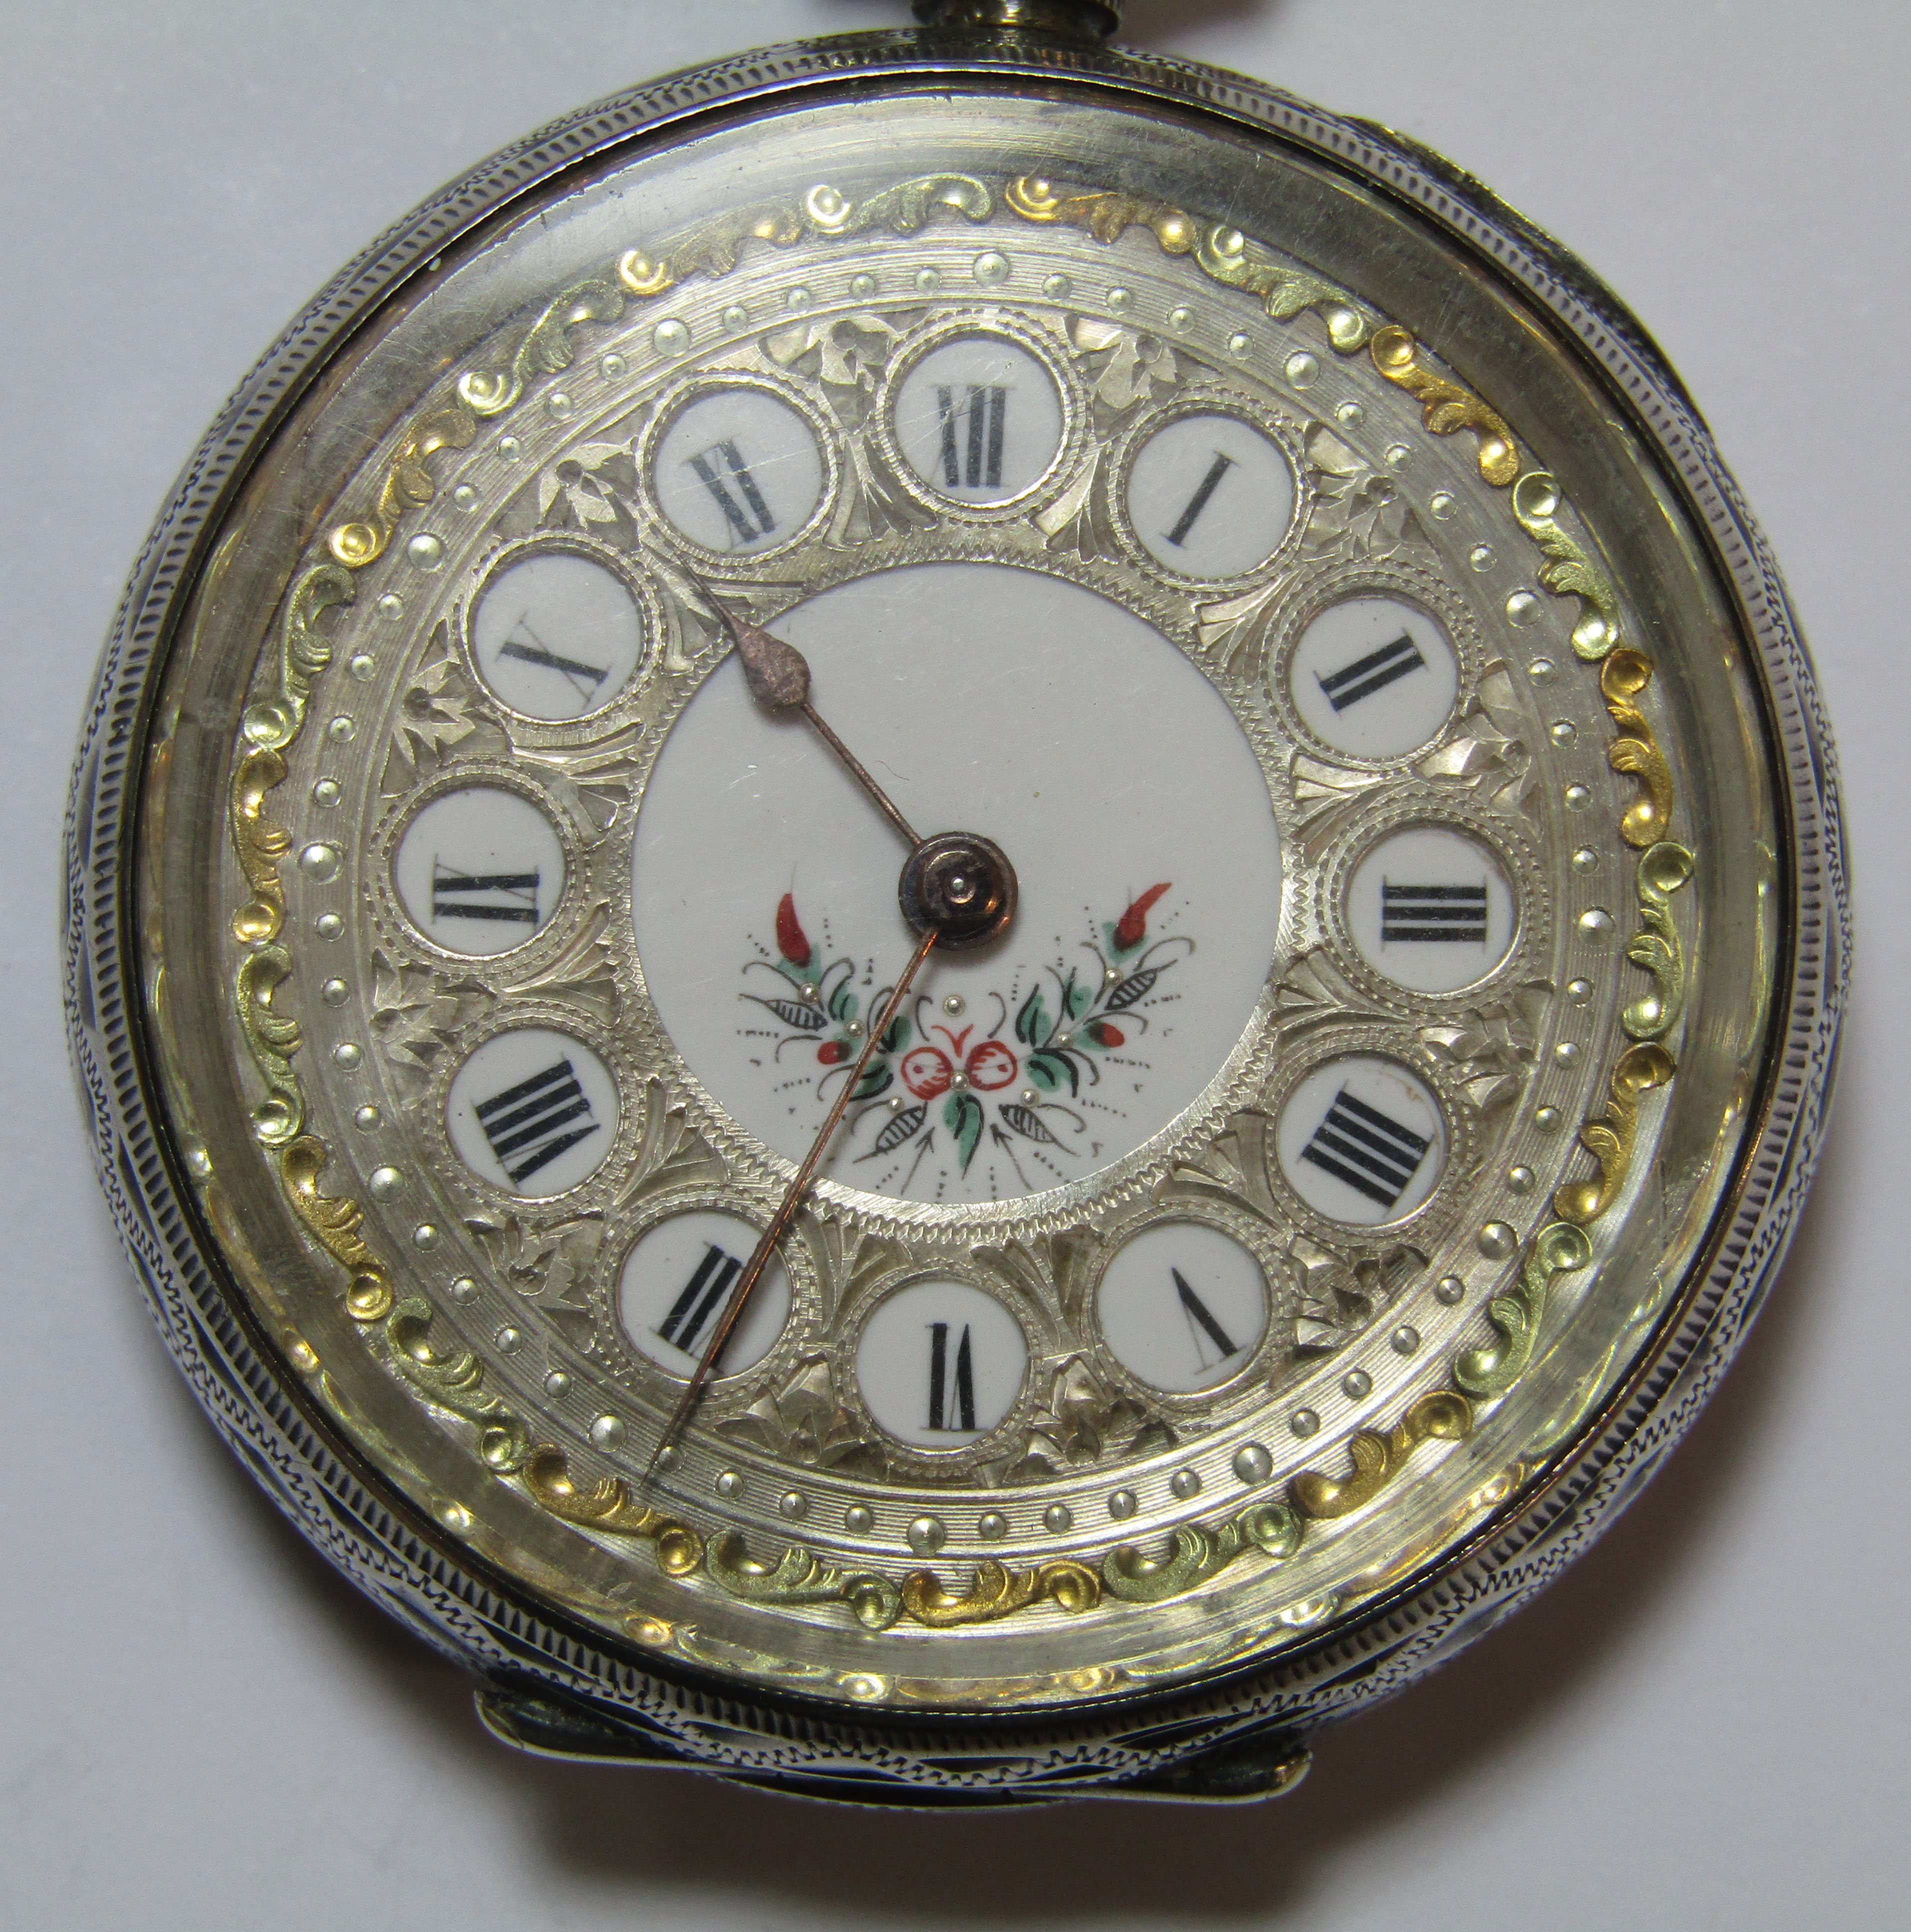 Ladies silver cased fob watch (works intermittently) - Image 2 of 7